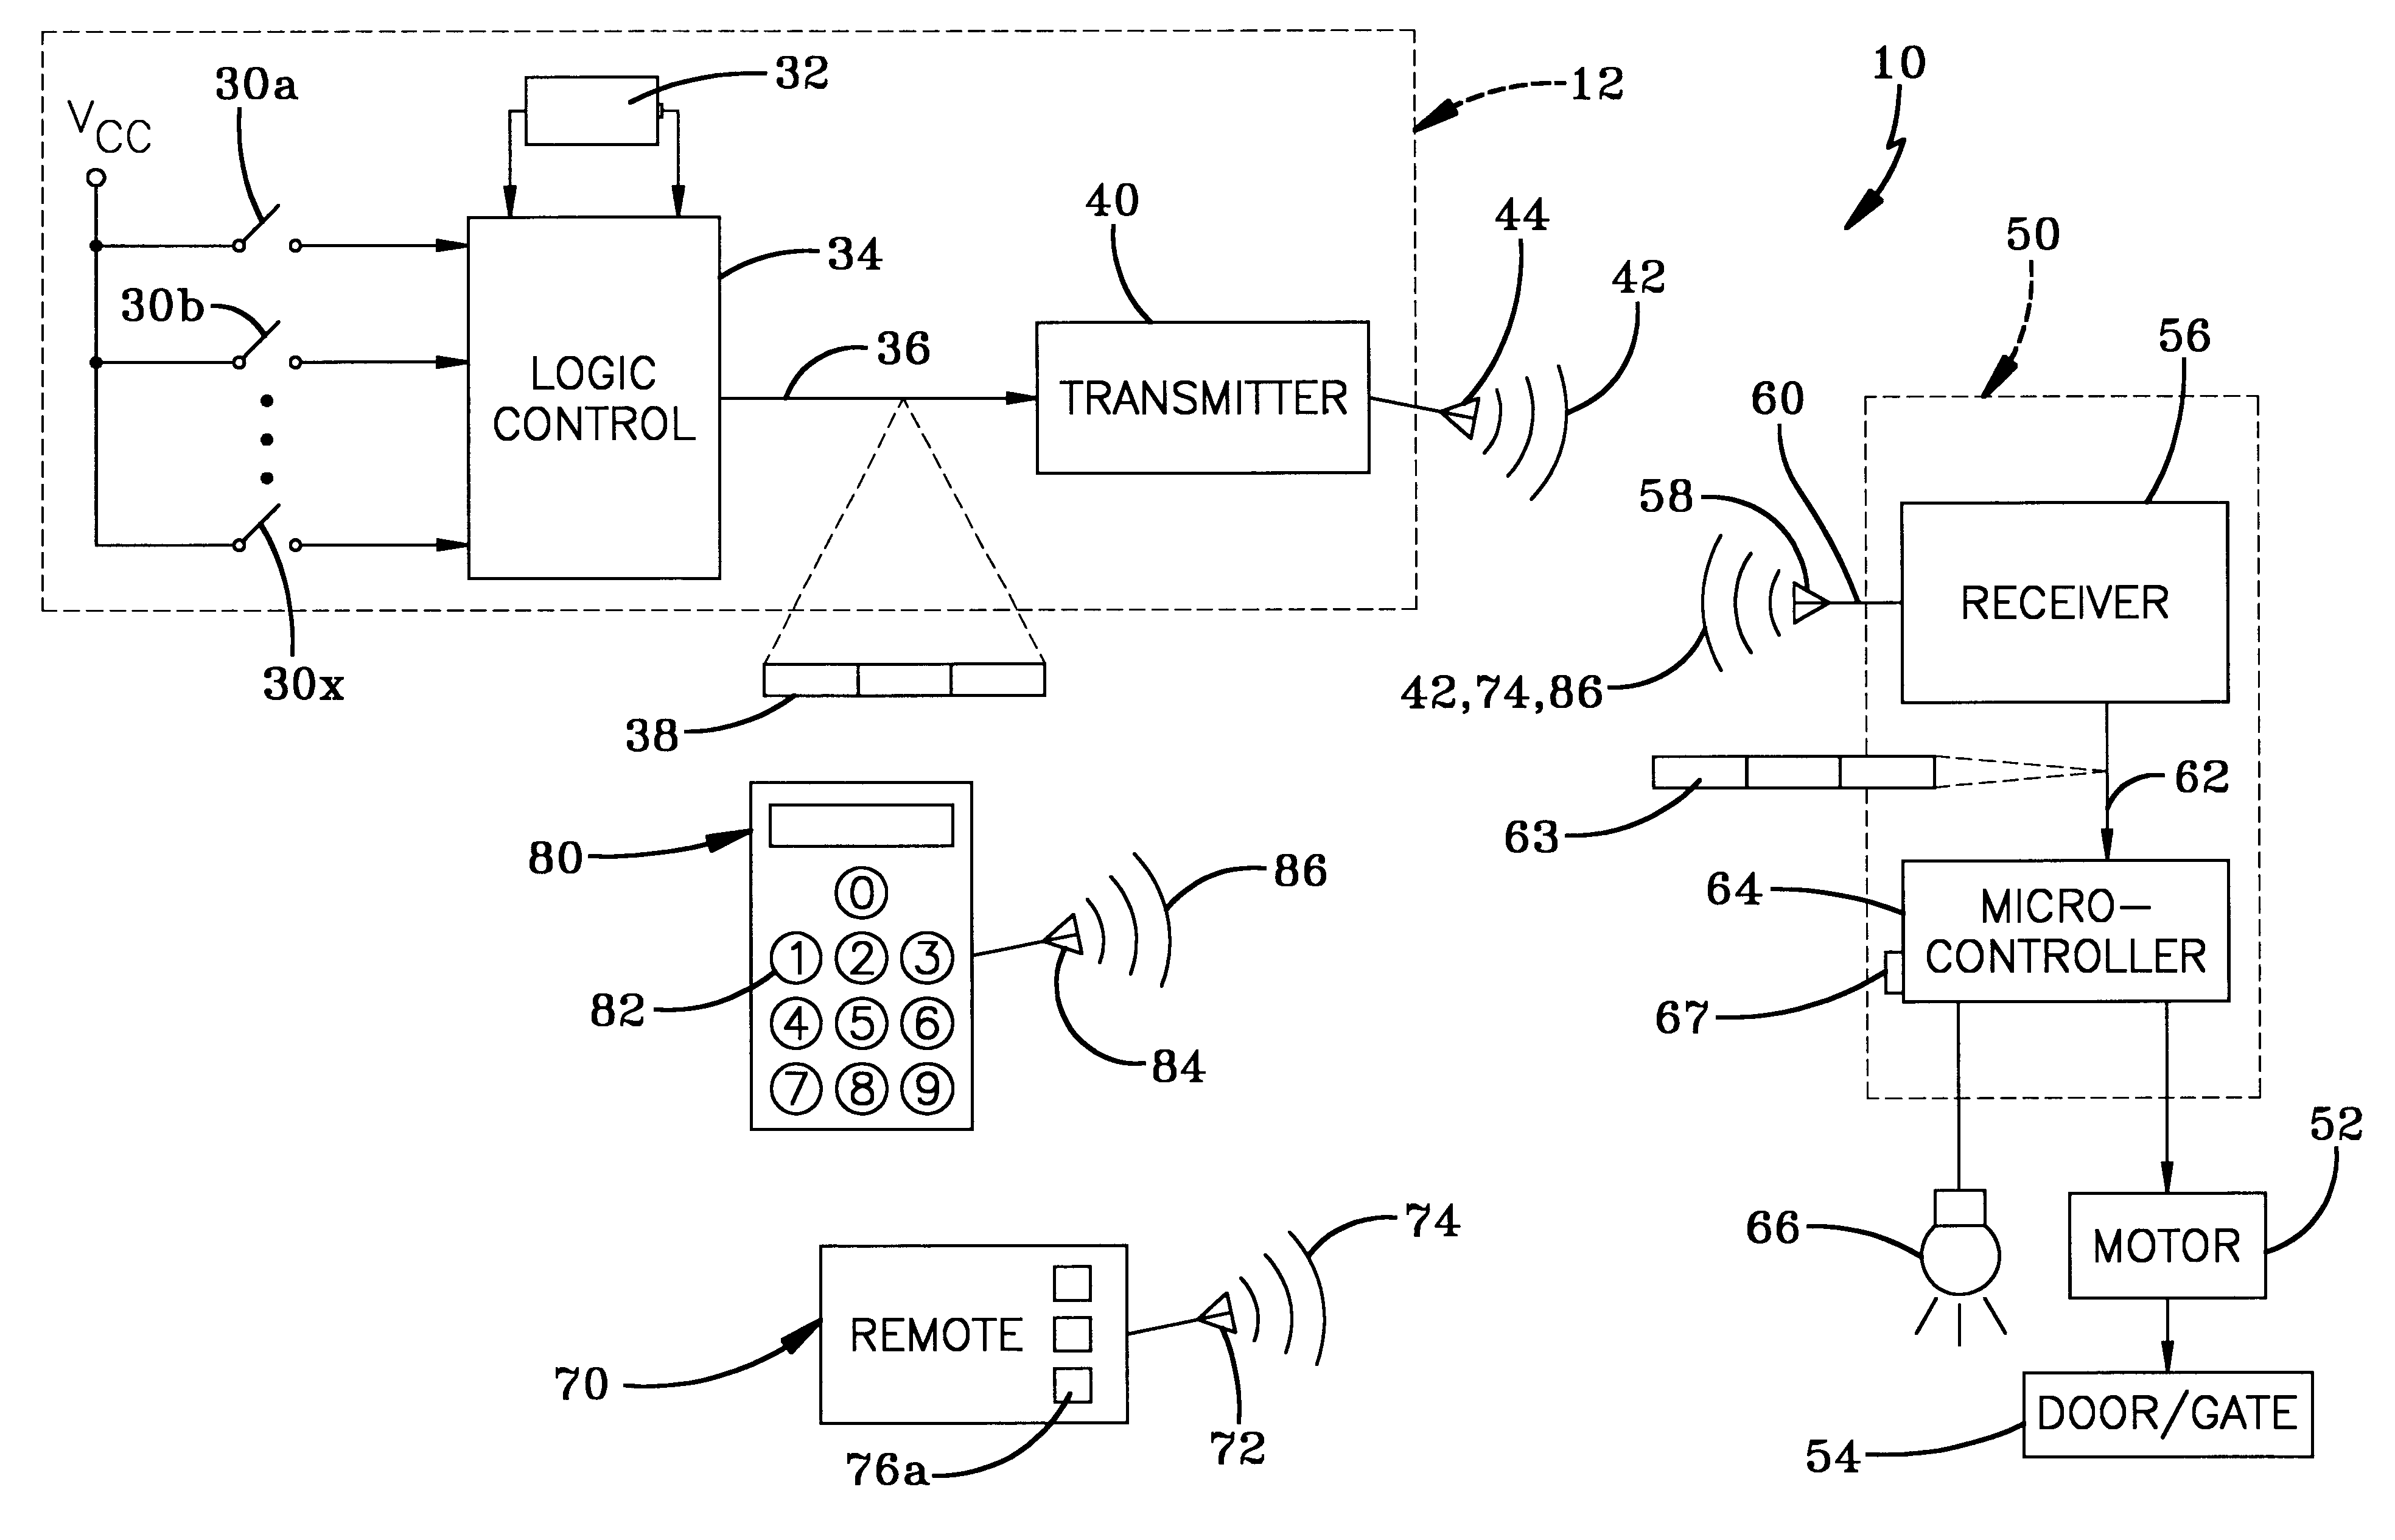 Wireless operating system utilizing a multi-functional wall station transmitter for a motorized door or gate operator